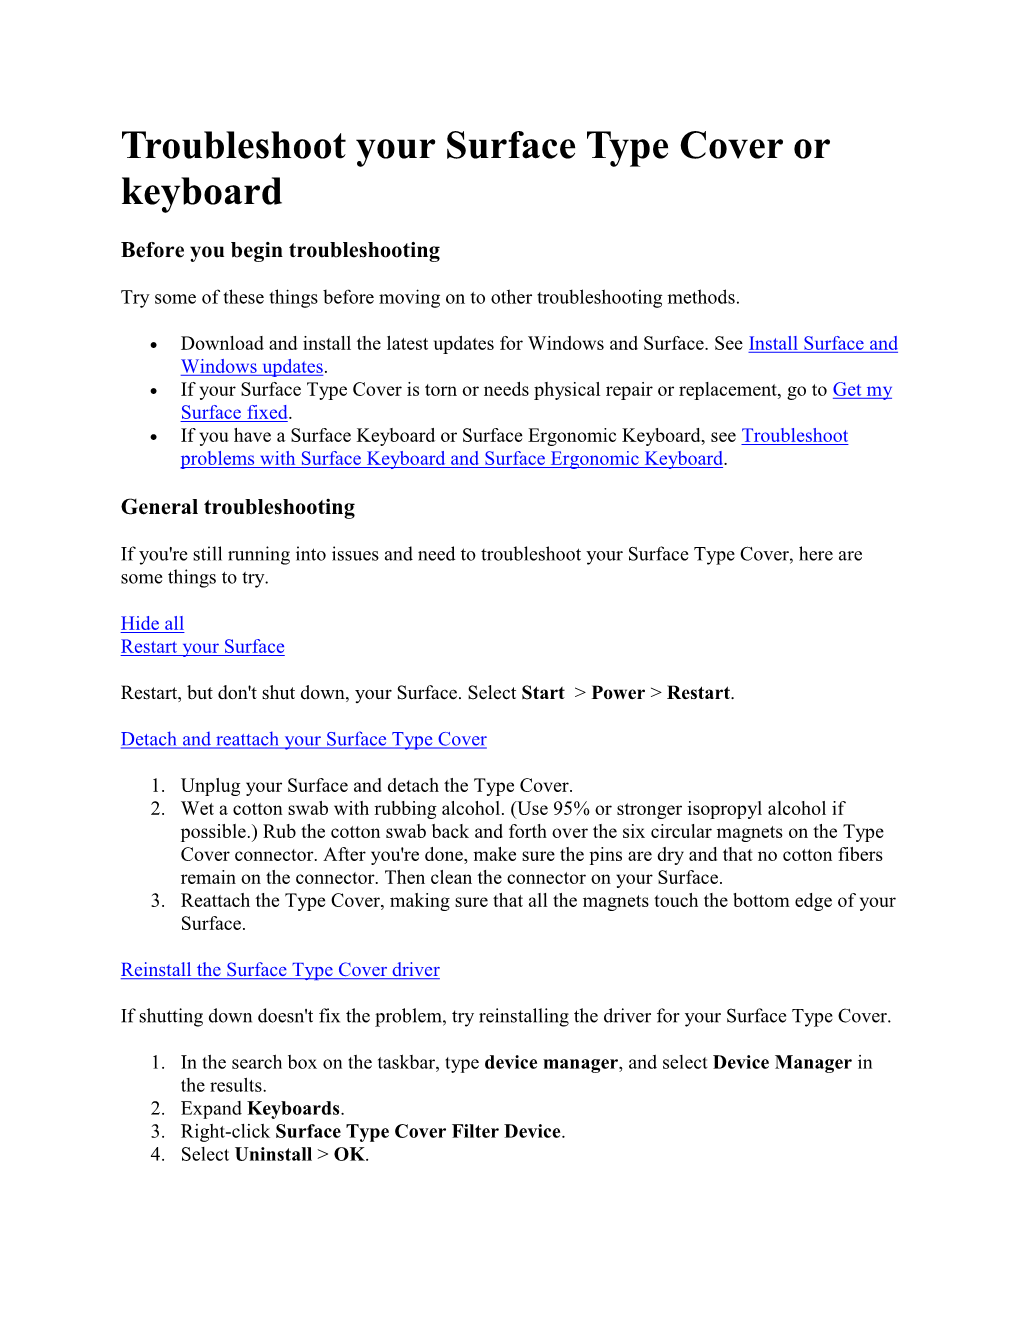 Troubleshoot Your Surface Type Cover Or Keyboard